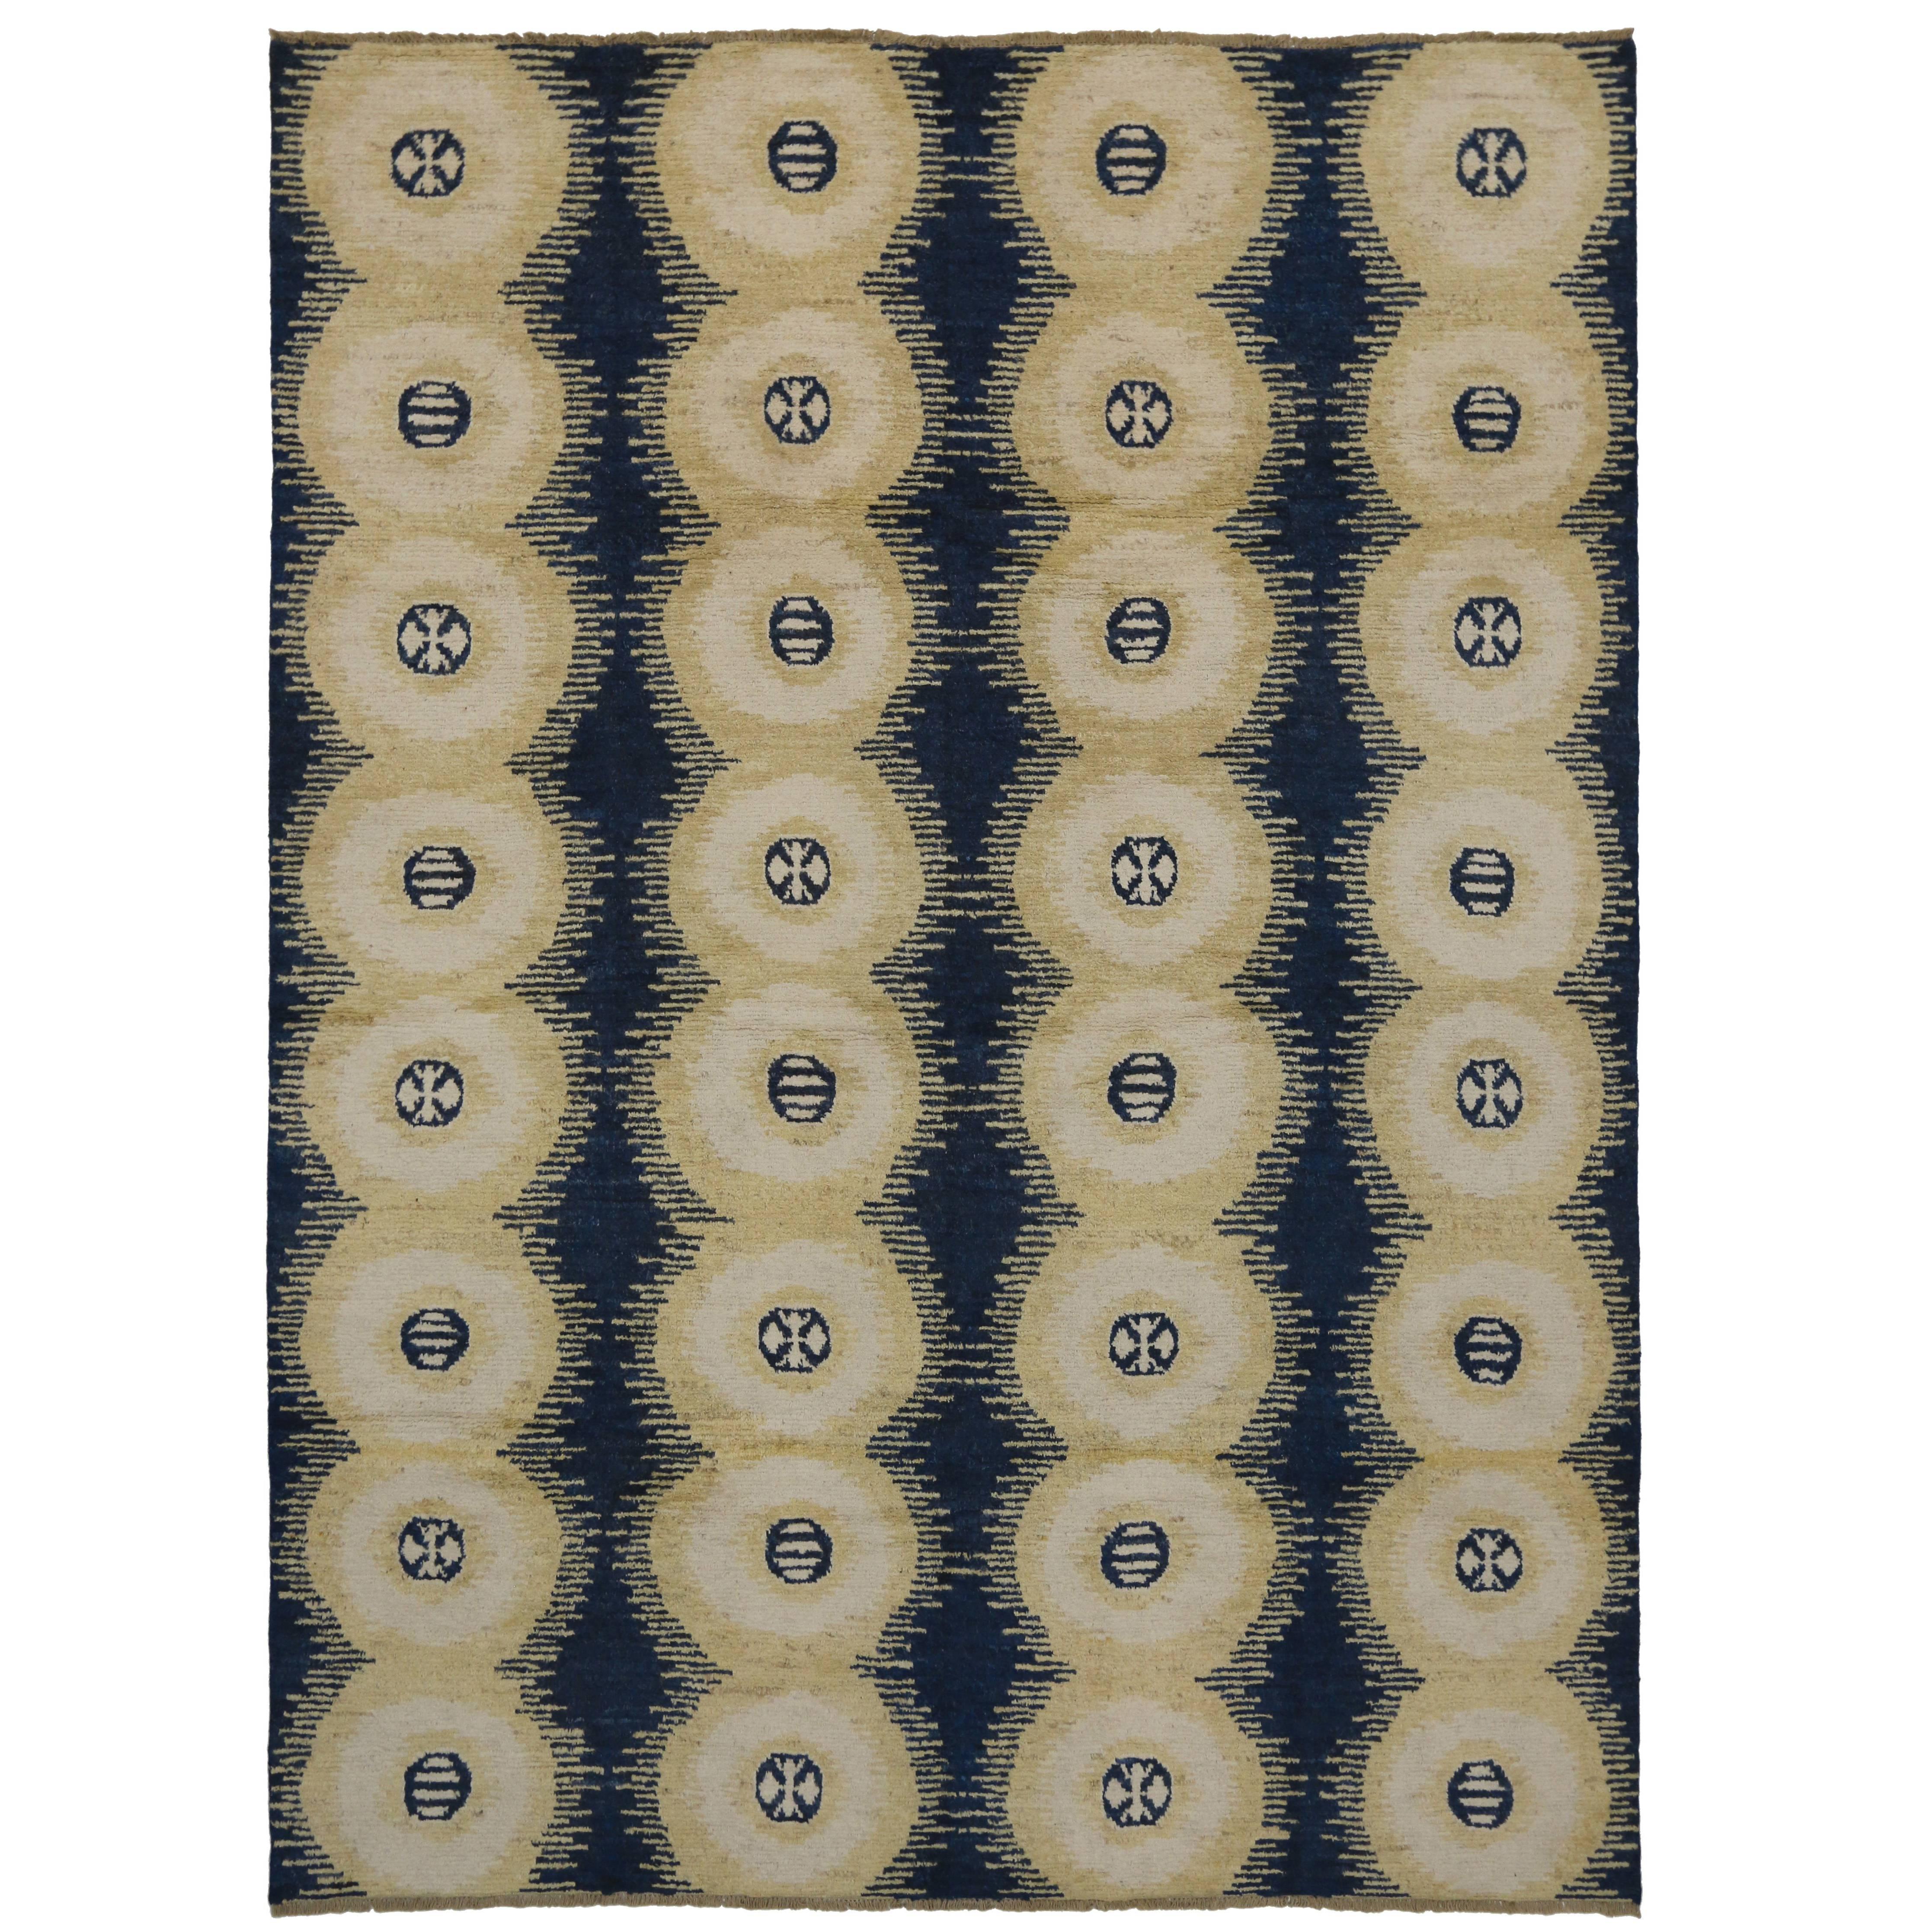 New Contemporary Moroccan Style Rug with Symmetrical Circles and Modern Style